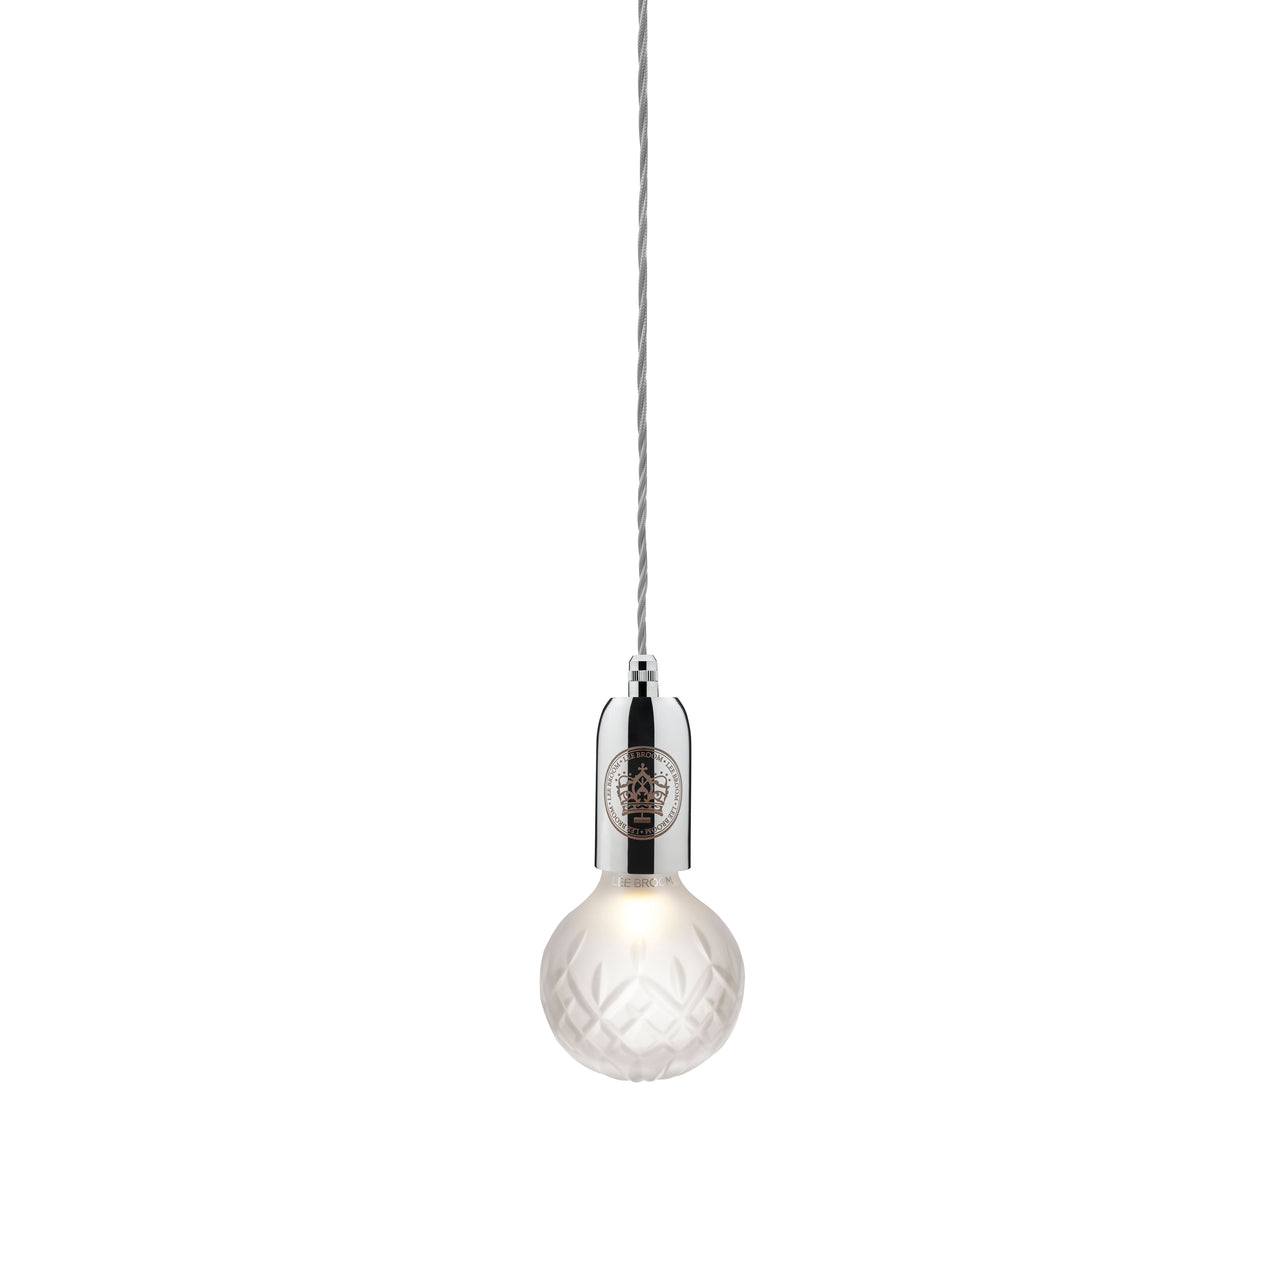 Crystal Bulb + Pendant: Bulb + Polished Chrome Fitting + Frosted